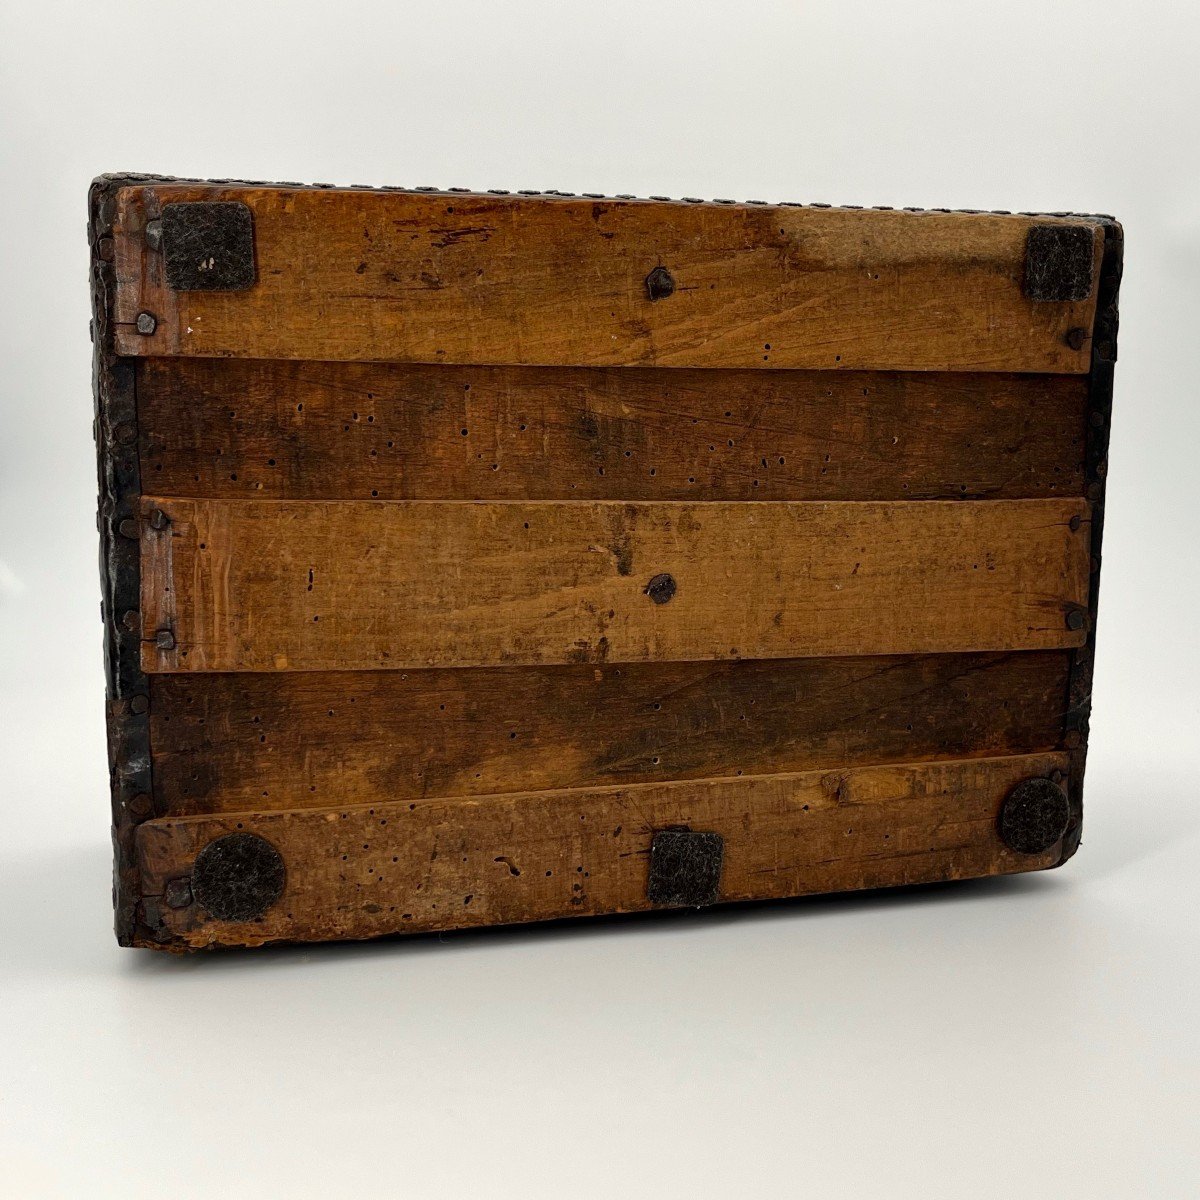 17th Century Box In Wood And Leather Decorated With Nails, Wrought Iron Handle And Lock 17th-photo-5